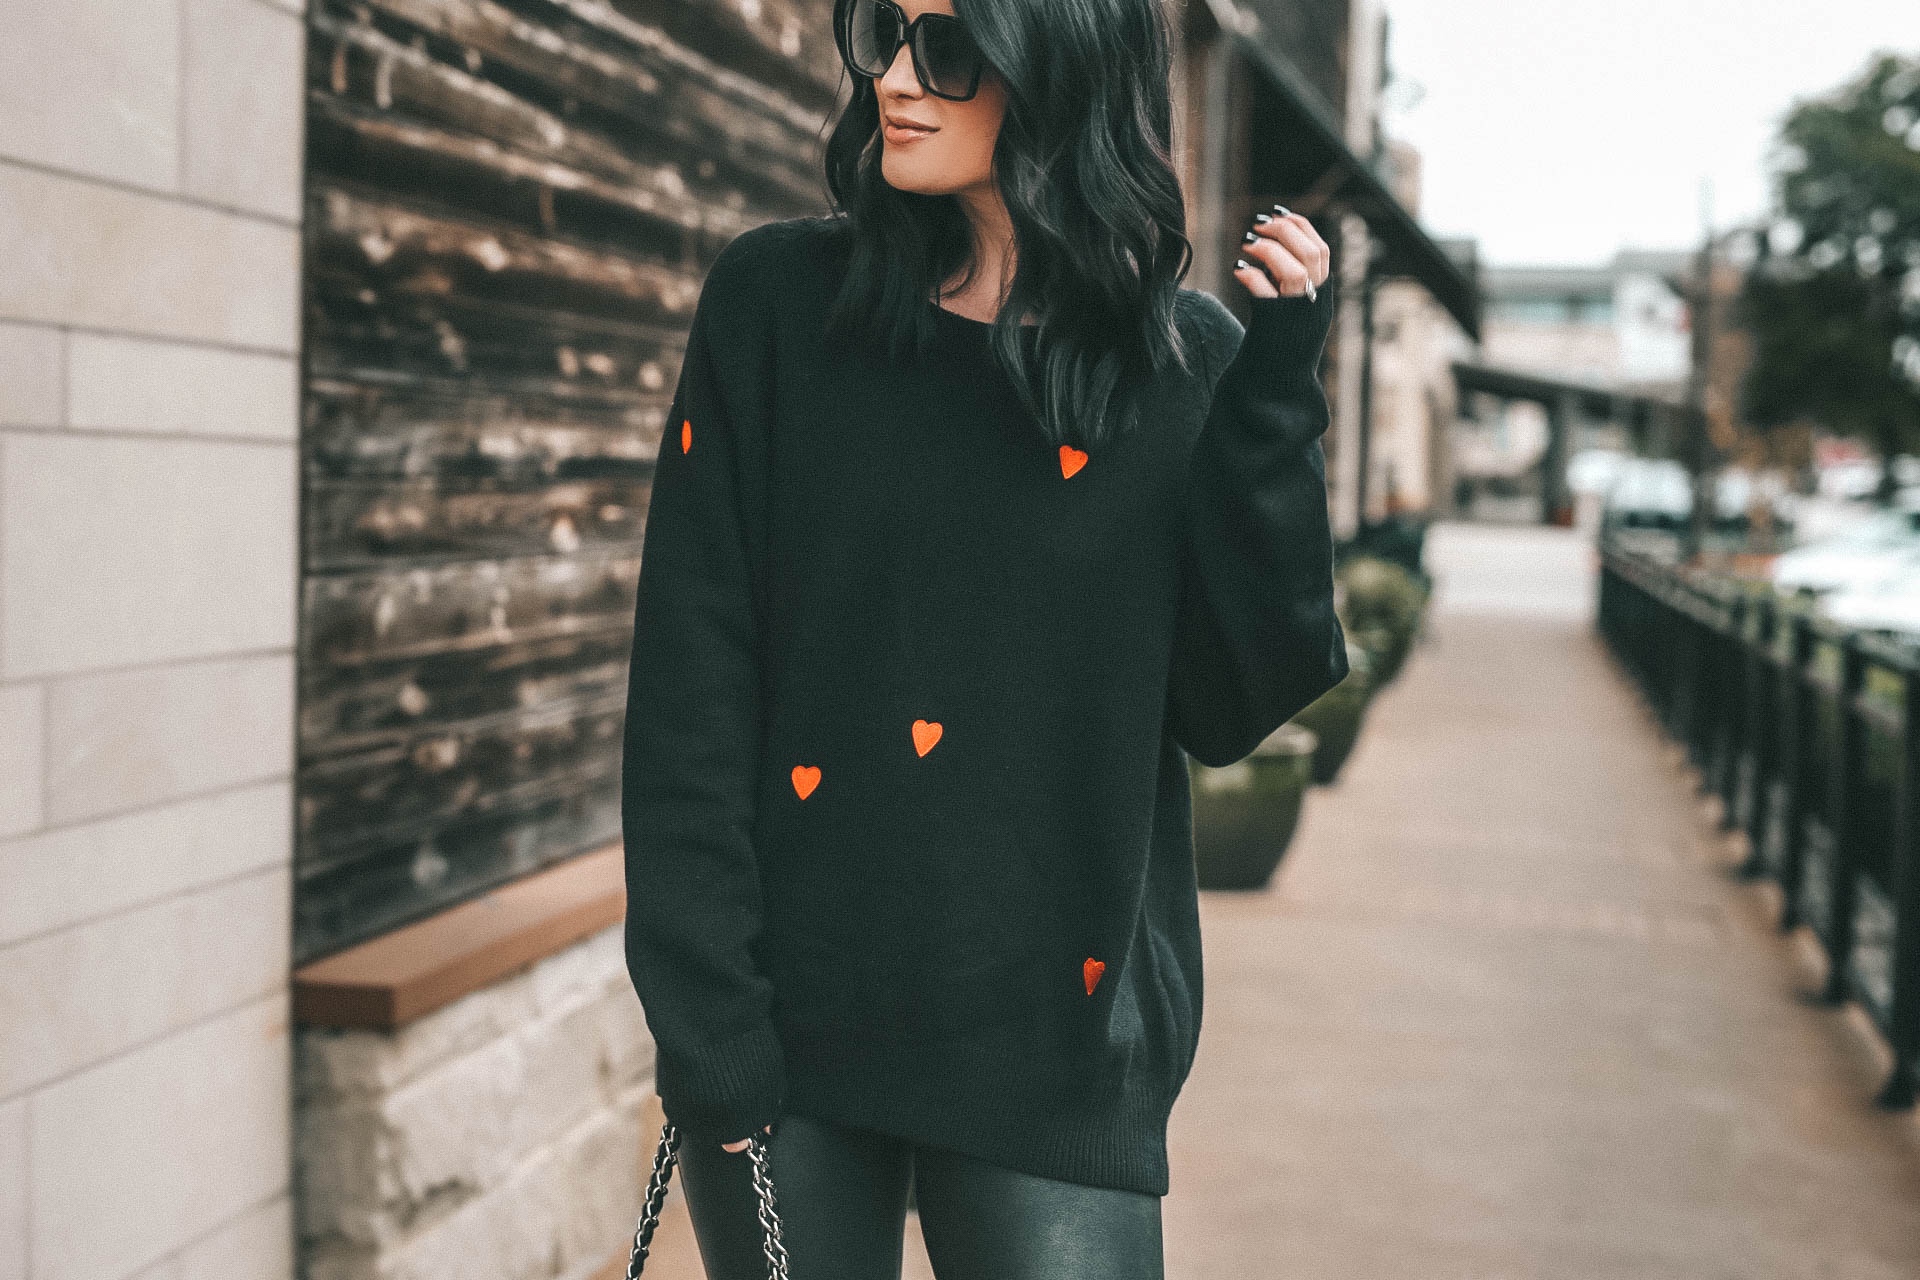 Cute Heart Sweaters by popular Austin fashion blog, Dressed to Kill: Image of a woman wearing a Chicwish sweater, Nordstrom leggings, Goodnight Macaroon boots, YSL sunglasses and Chanel bag.